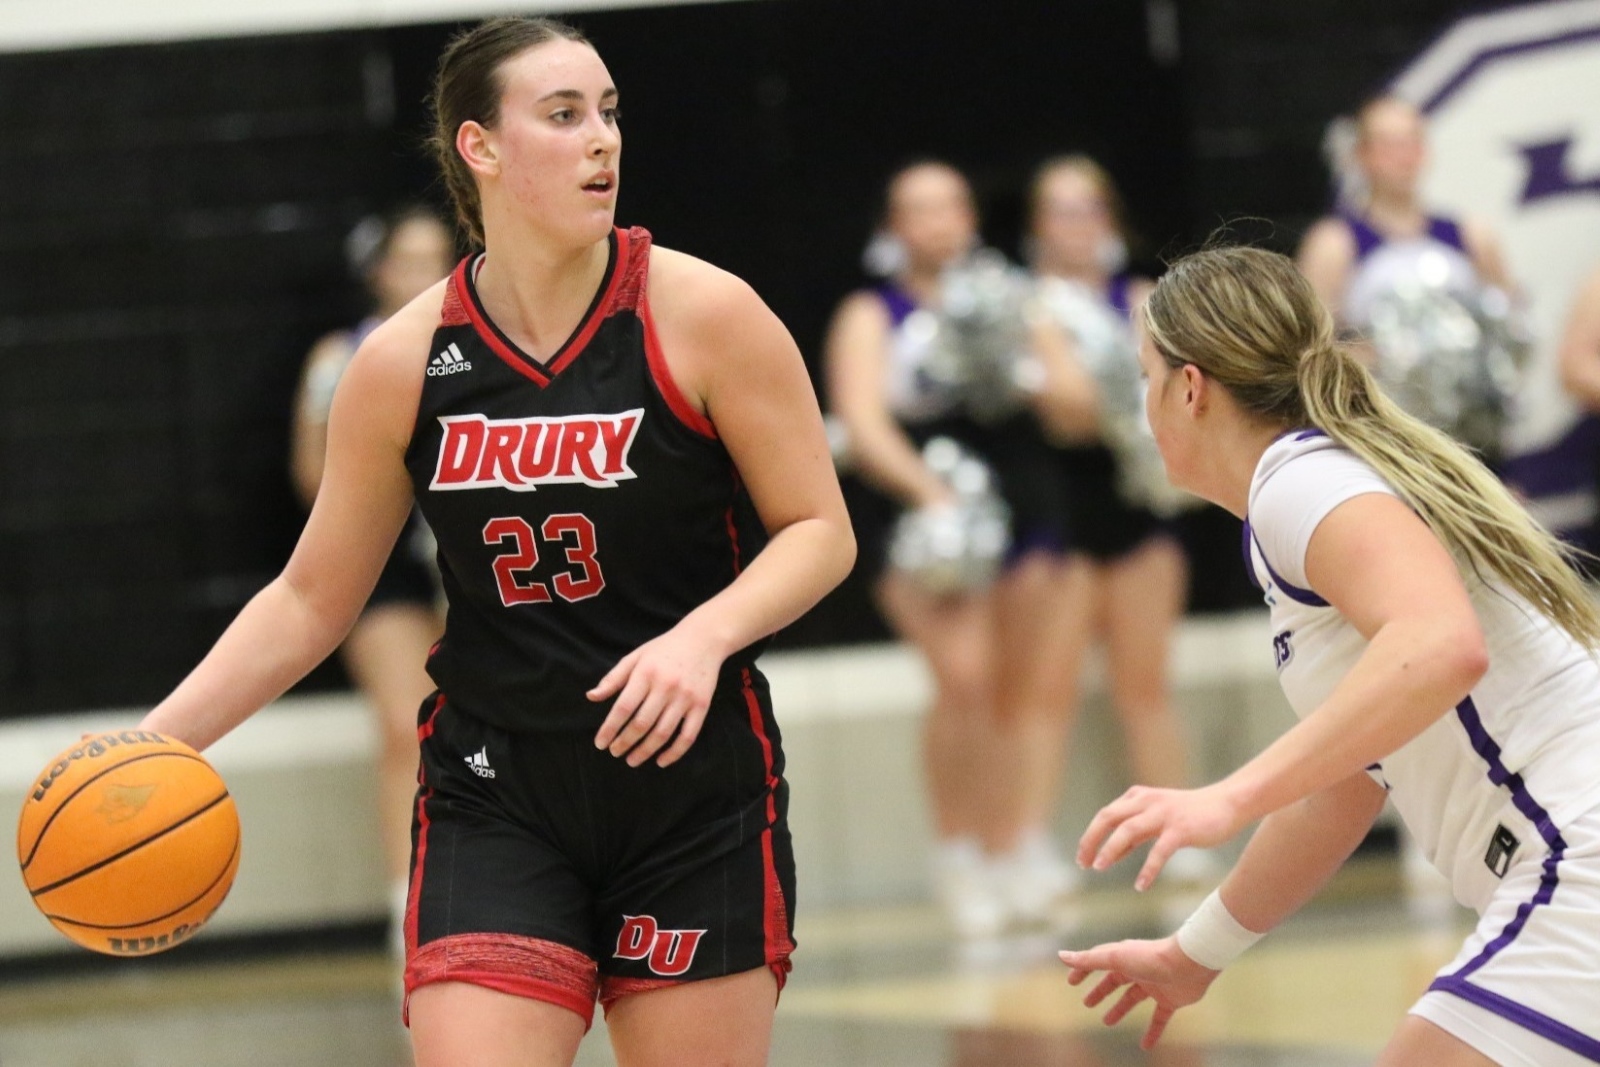 Reese Schaaf, wearing a Drury women's basketball uniform, dribbles the ball during a game.